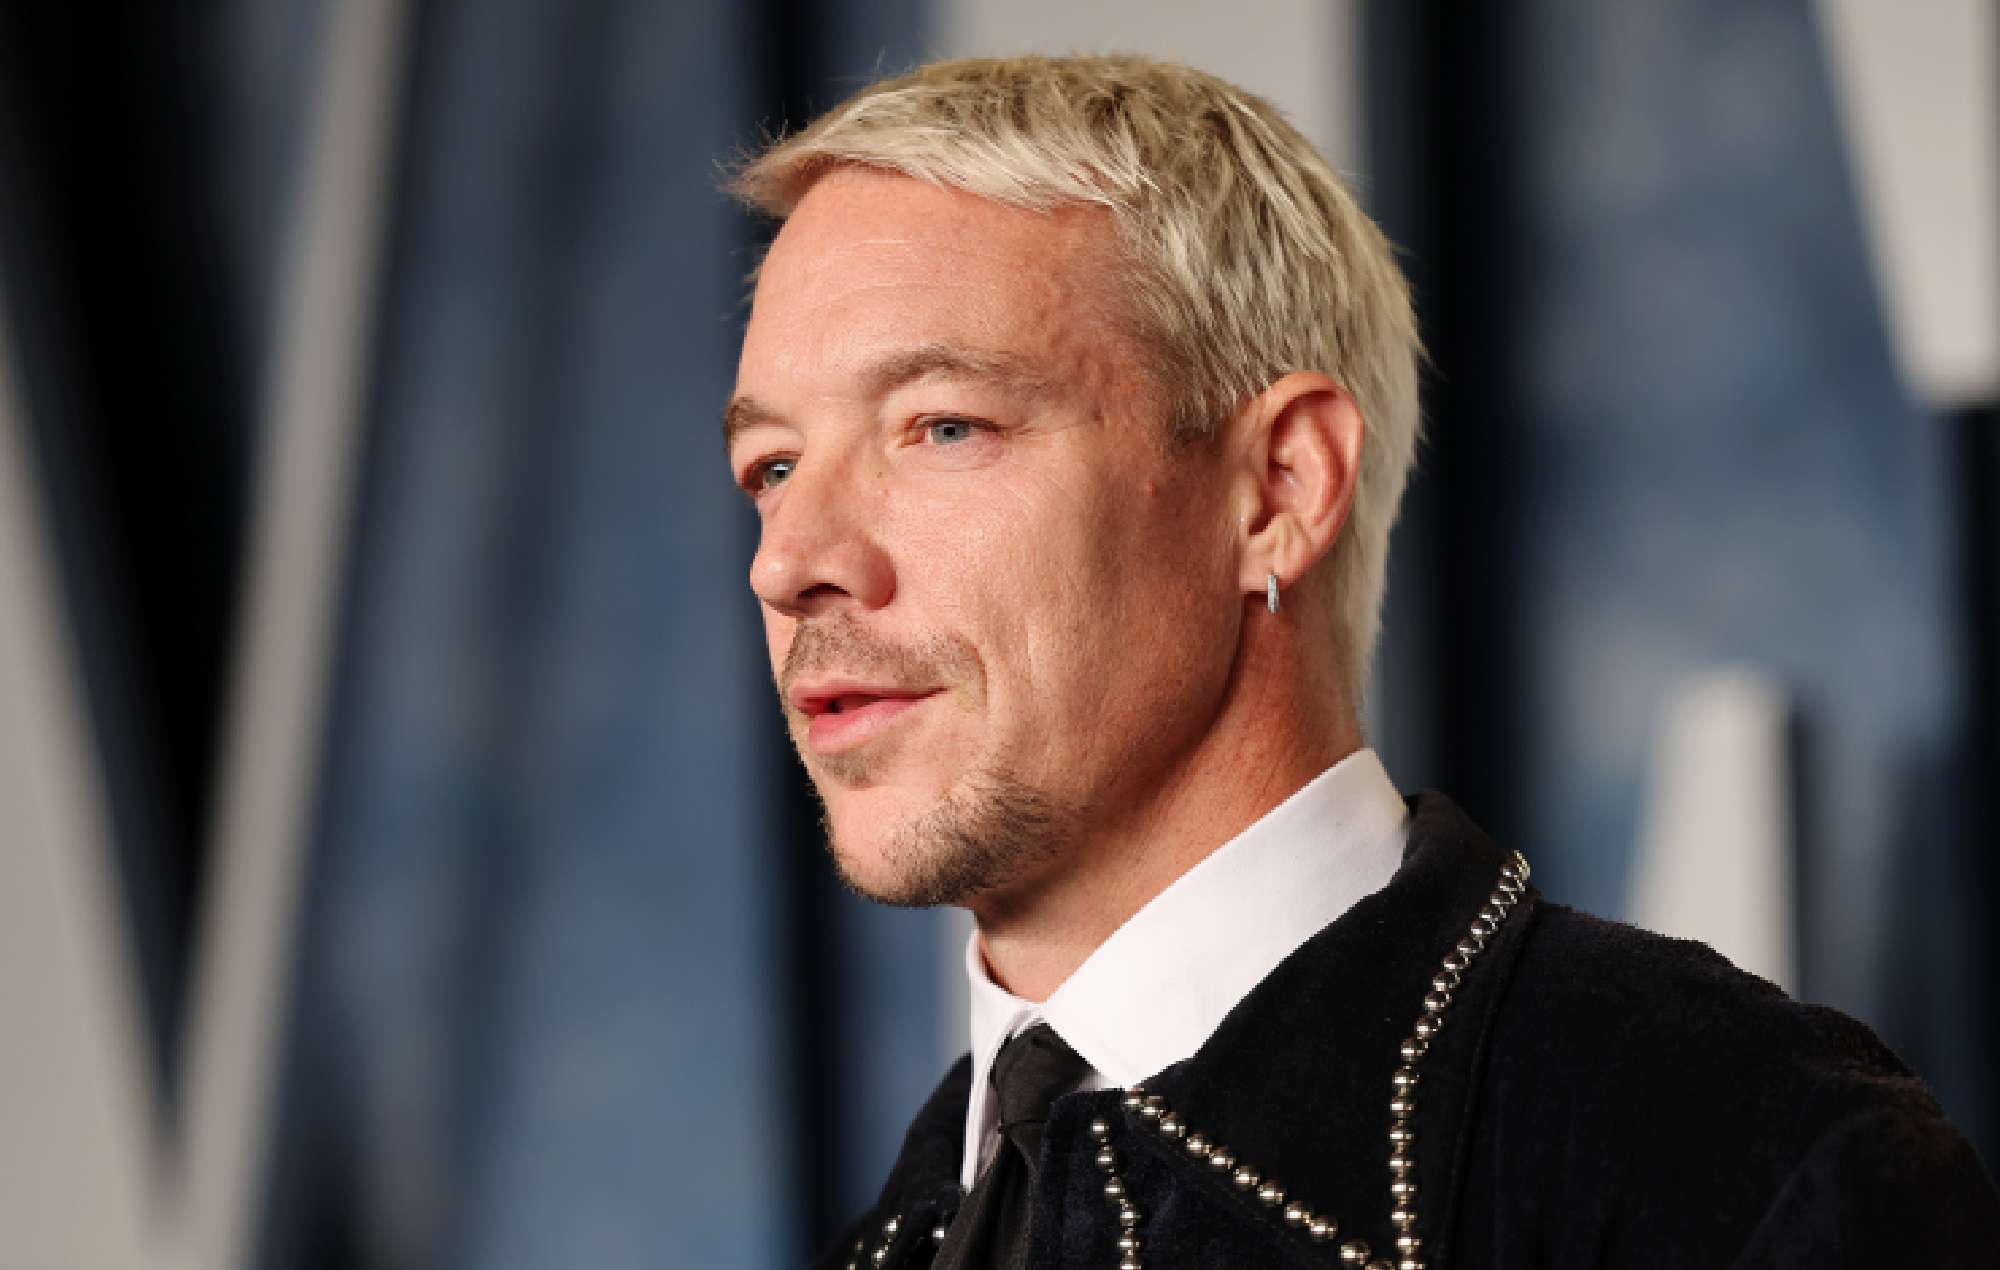 Diplo being sued for distributing revenge porn in new lawsuit